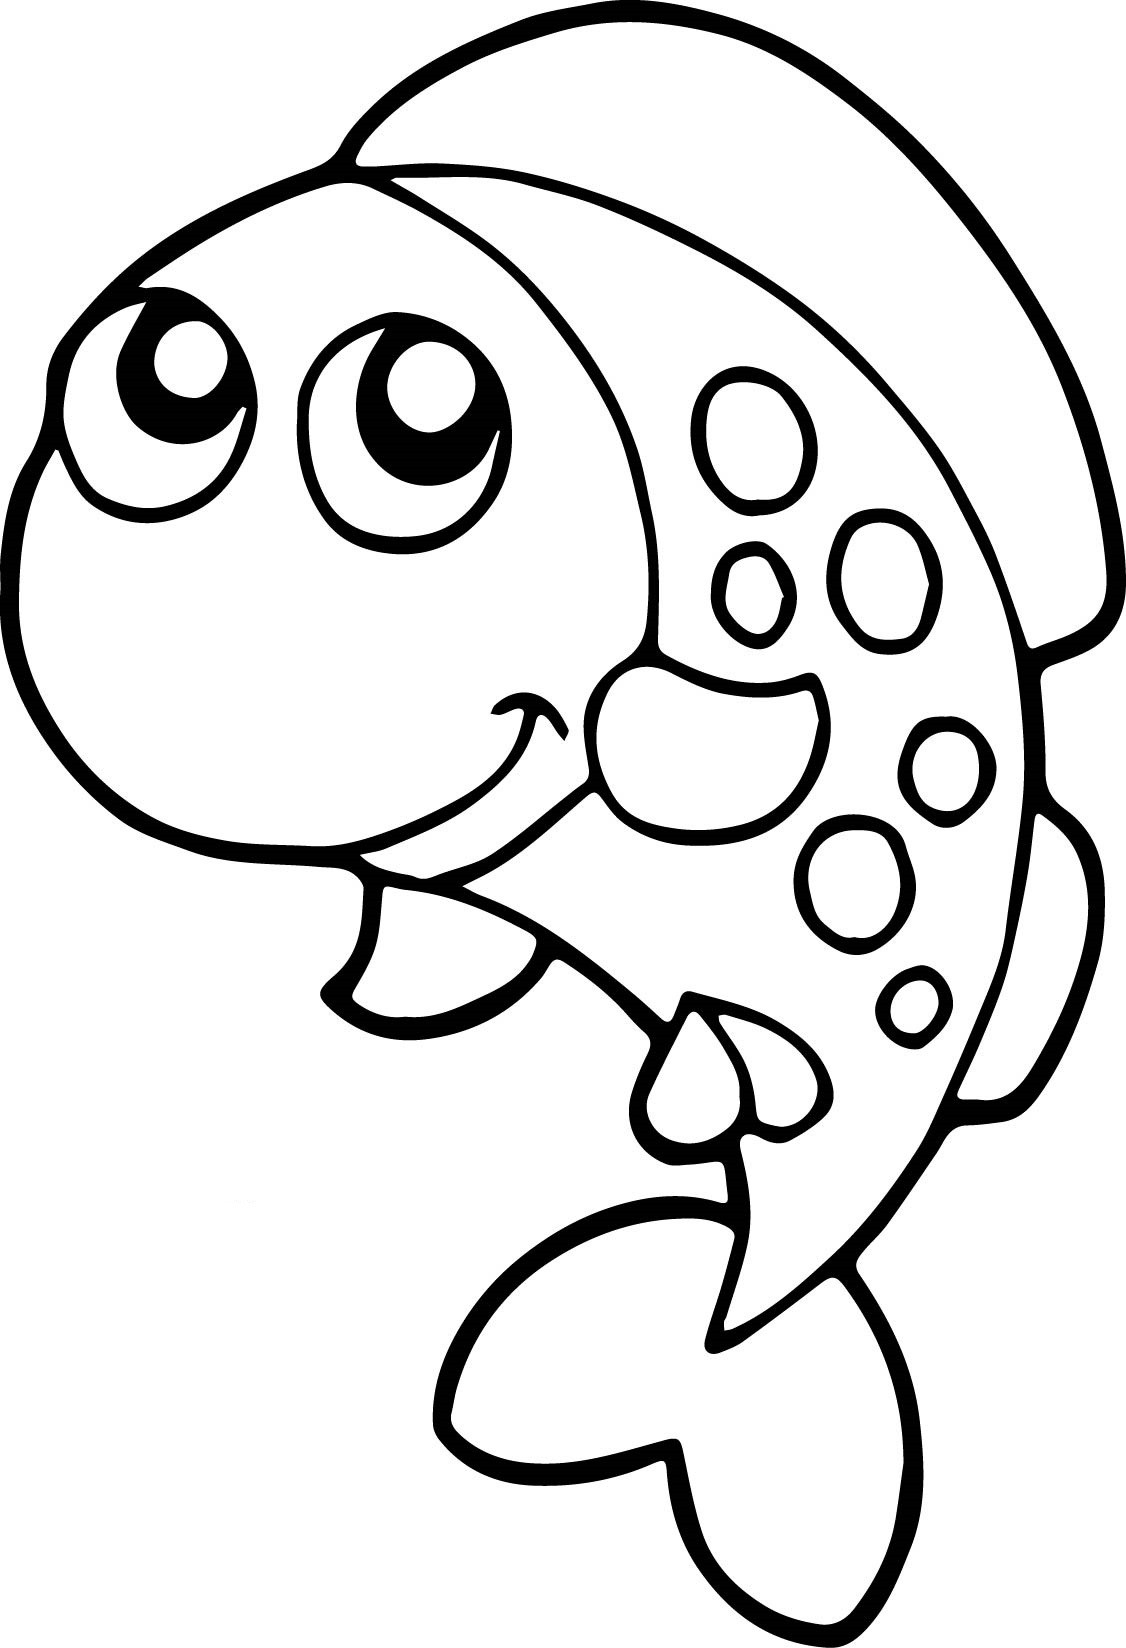 Coloring Pages Fishing Fish Coloring Pages For Kids Preschool And Kindergarten For Fishing